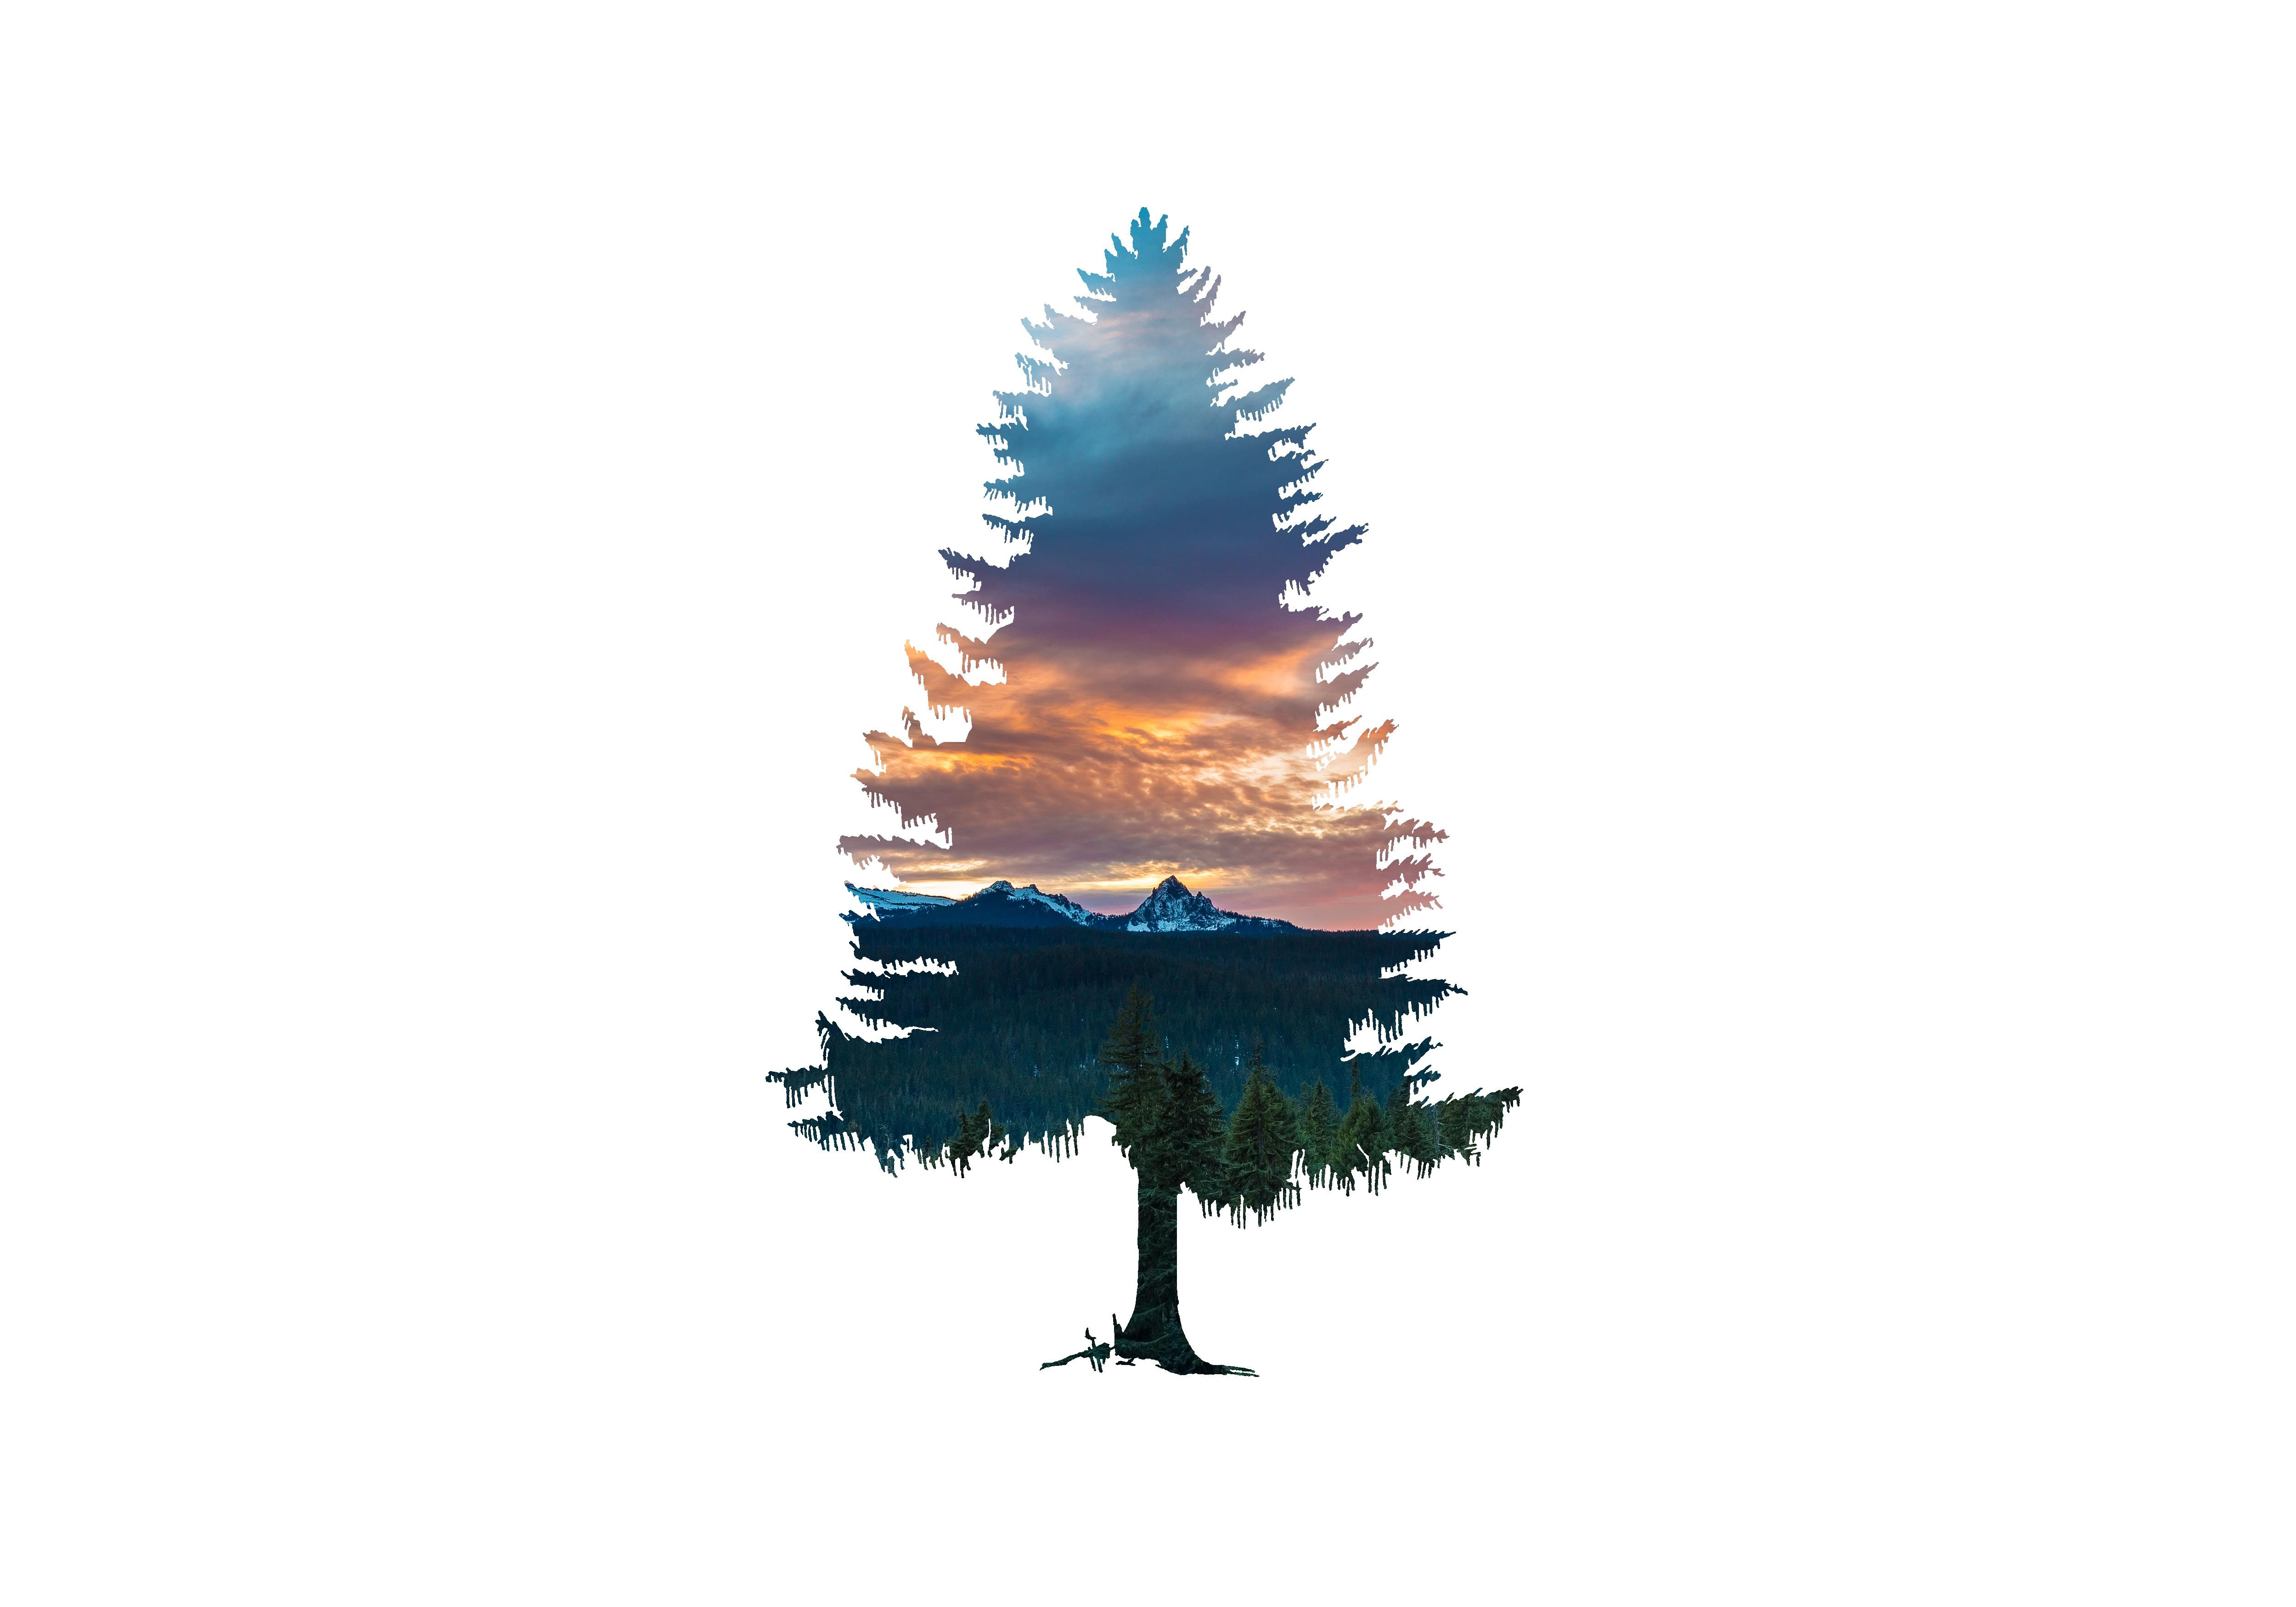 A silhouette of a Christmas tree with a landscape depicted in it